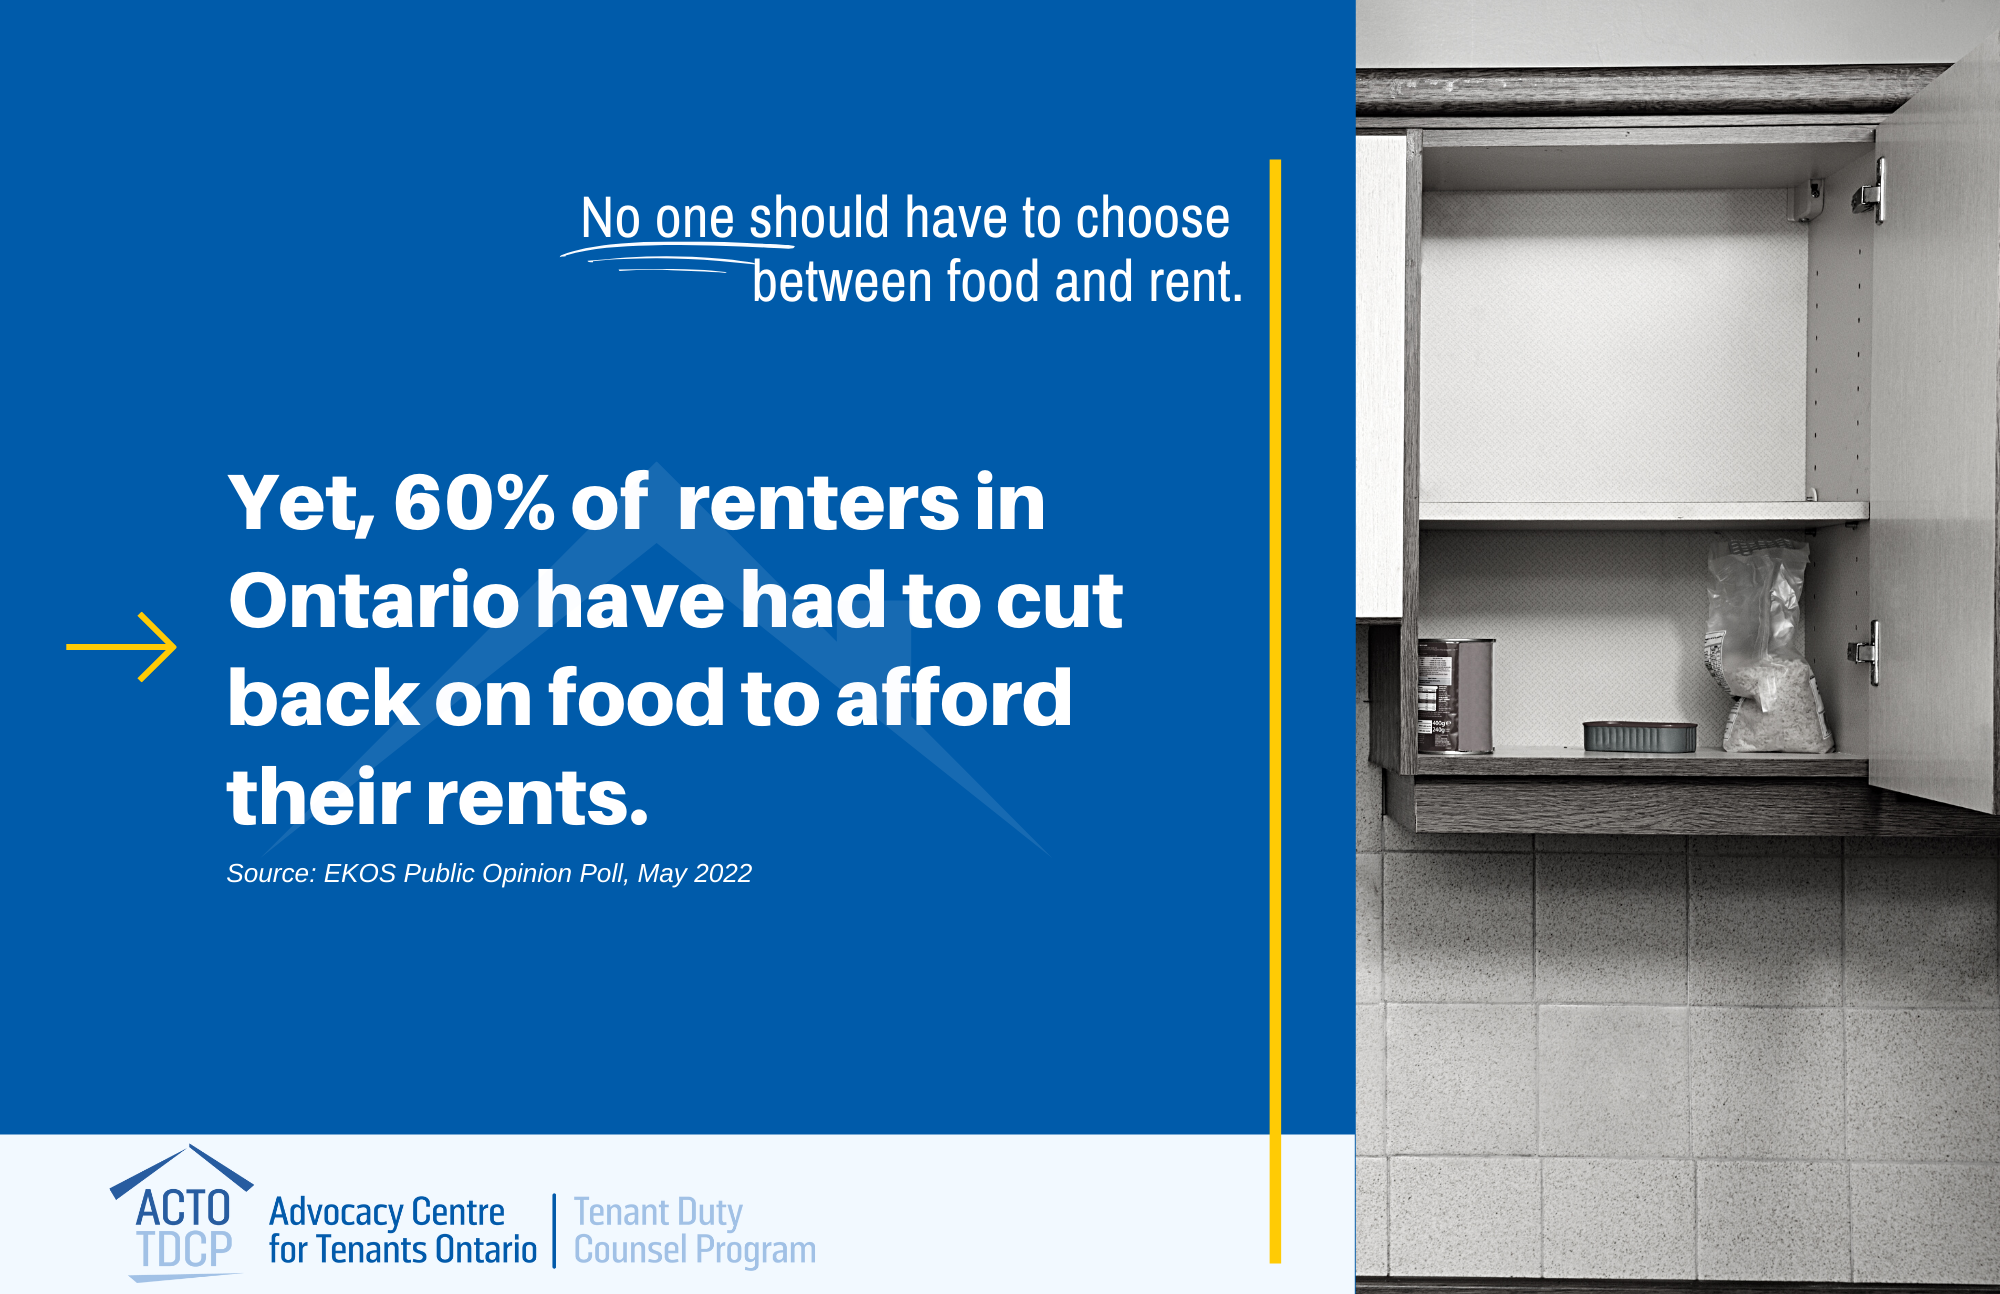 Picture of empty cupboard with minimal food. White text on blue background reads "No one should have to choose between food and rent. Yet, 60% of renters in Ontario have to cut back on food to afford their rents. Source: EKOS public opinion poll, May 2022." Logo reads: "Advocacy Centre for Tenants Ontario."